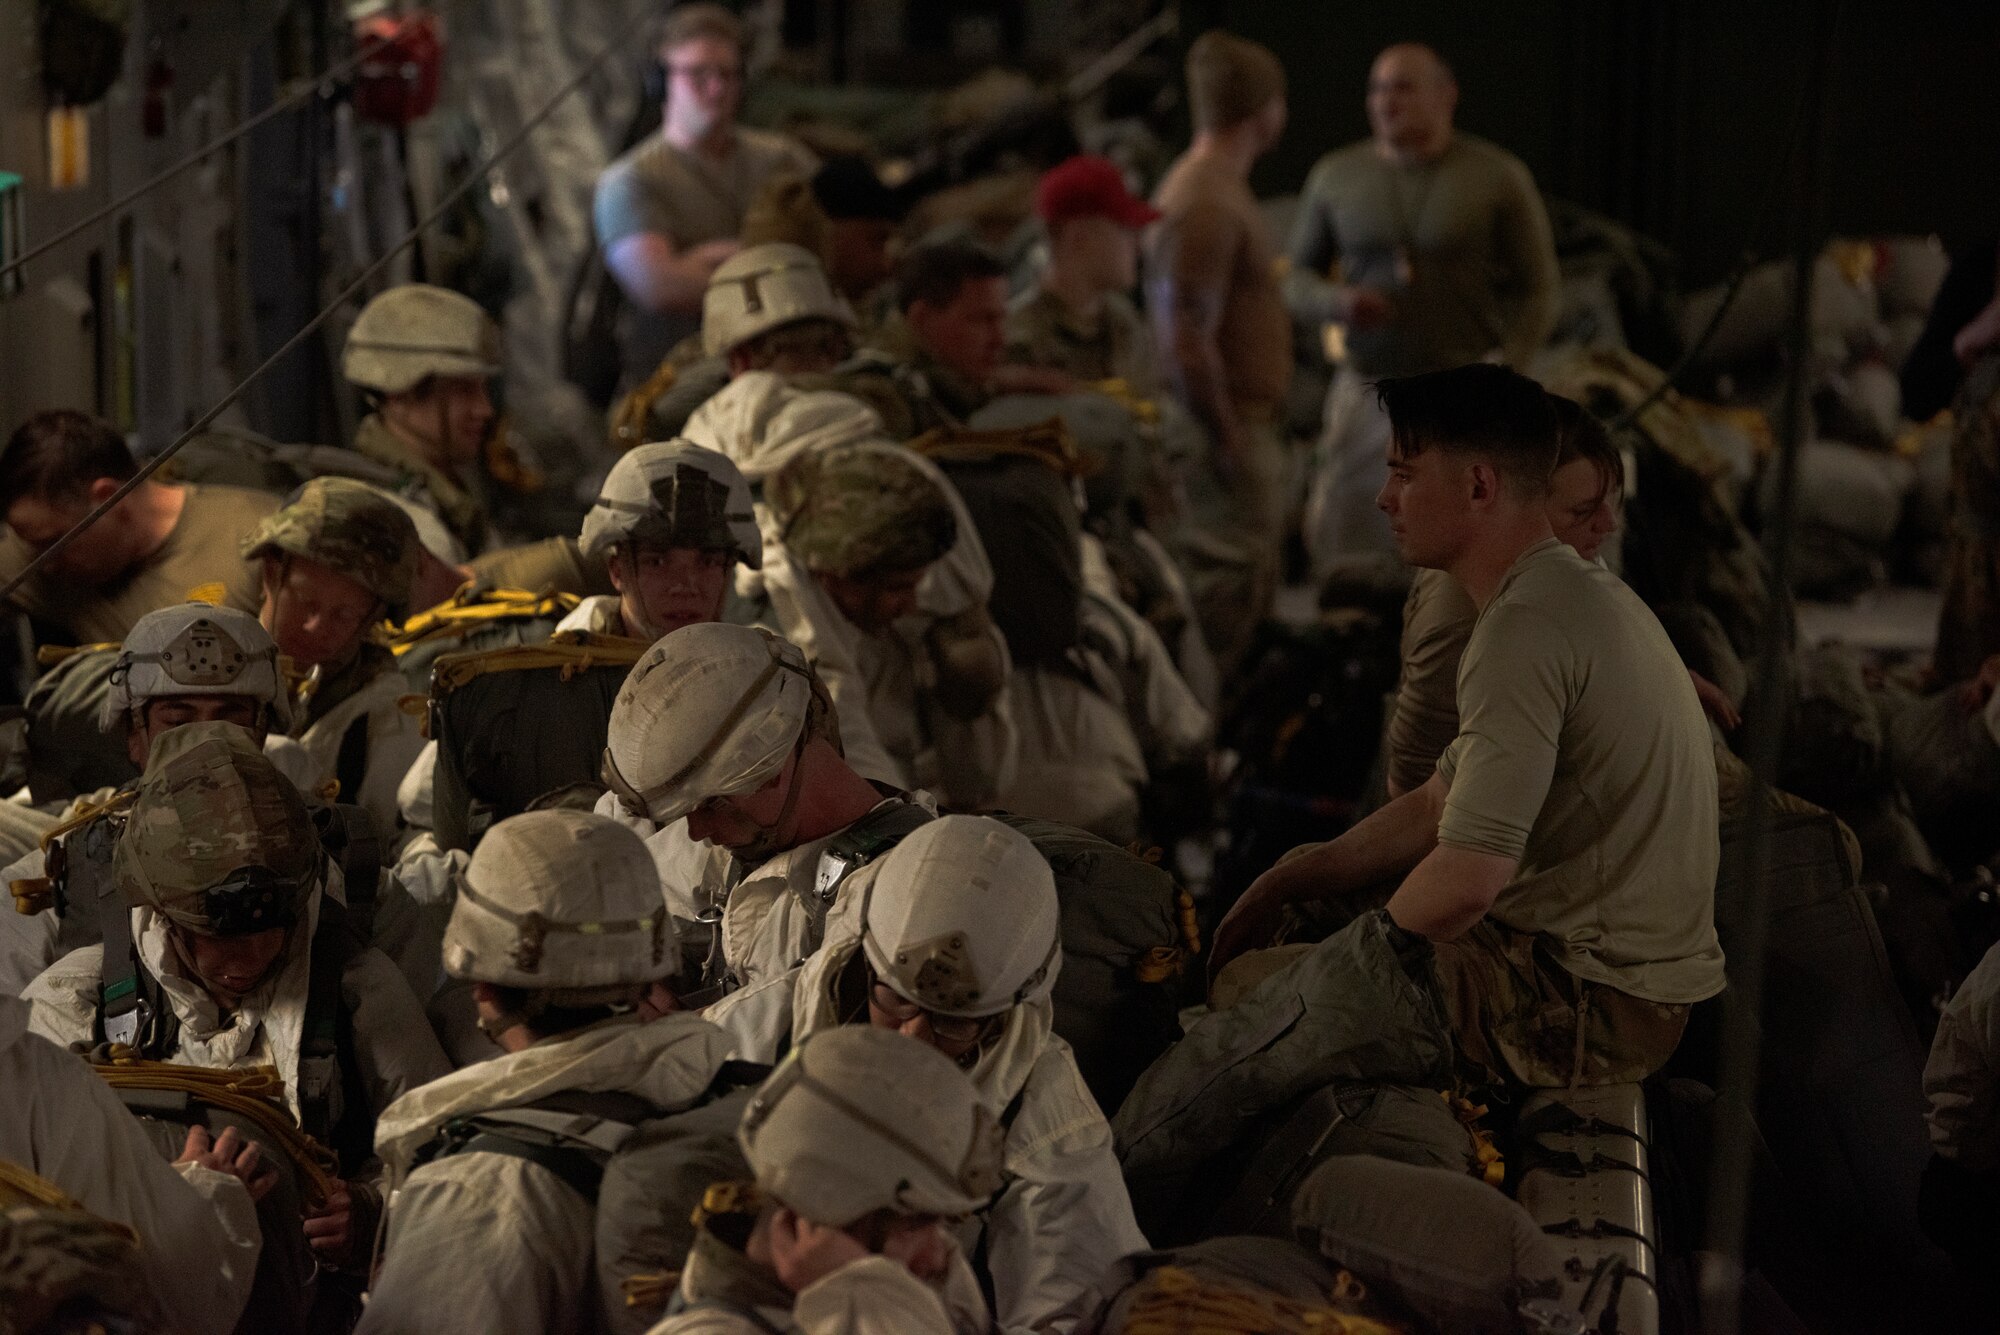 U.S. Soldiers with the 4th Brigade Combat Team, 25th Infantry Division prepare for an airdrop mission over Norway during Exercise Swift Response, May 10, 2022. Approximately 9,000 service members from 17 Allied and partner nations will participate in Swift Response, including approximately 2,700 U.S. Soldiers and Airmen. (U.S. Air Force photo by Staff Sgt. Zoe Thacker)